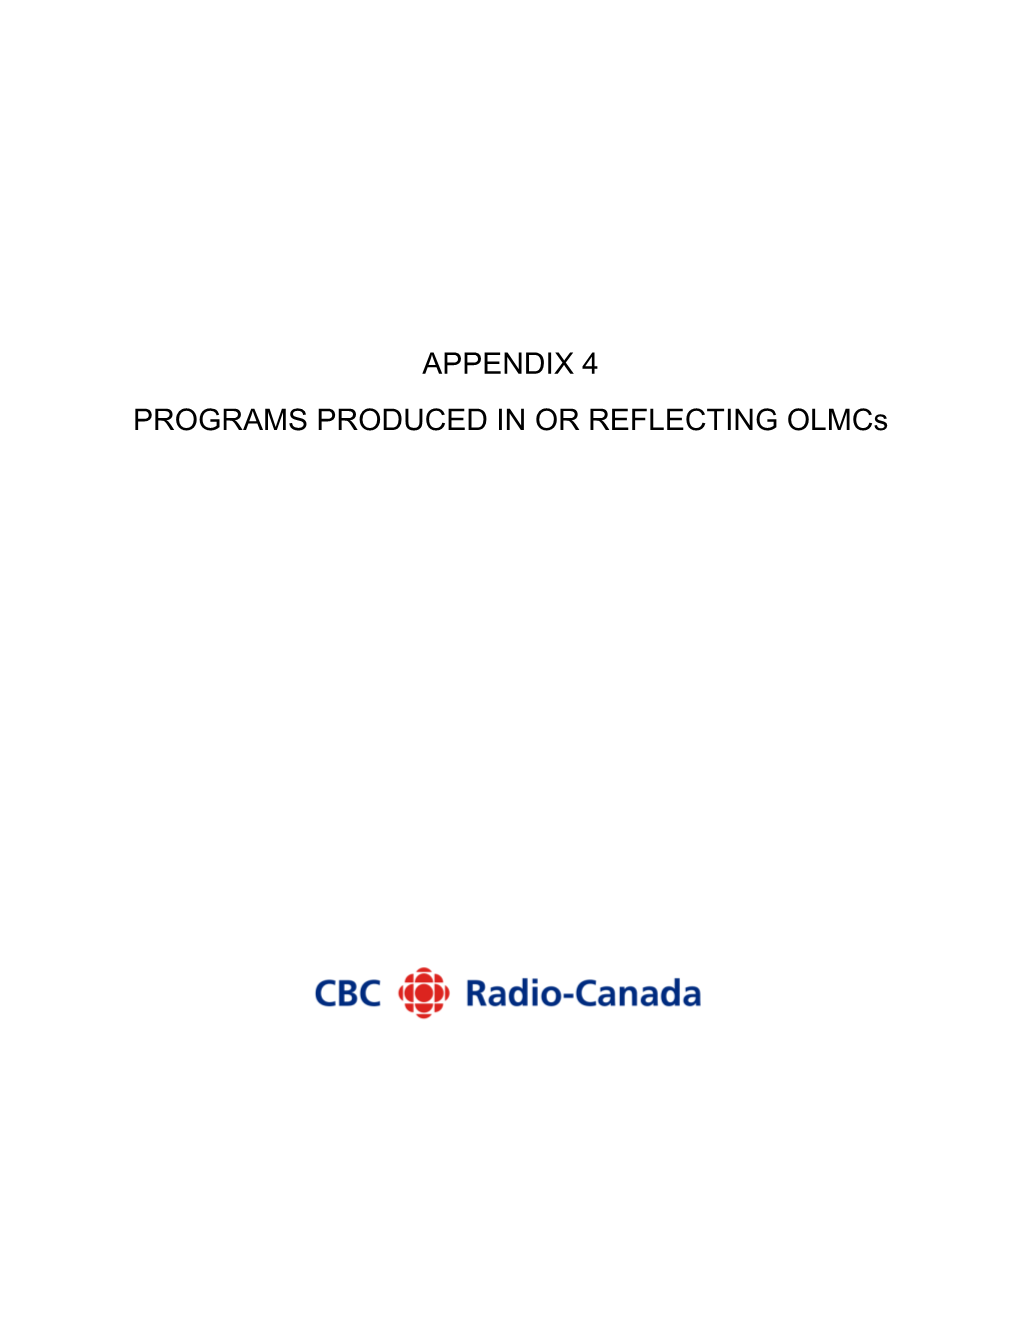 APPENDIX 4 PROGRAMS PRODUCED in OR REFLECTING Olmcs